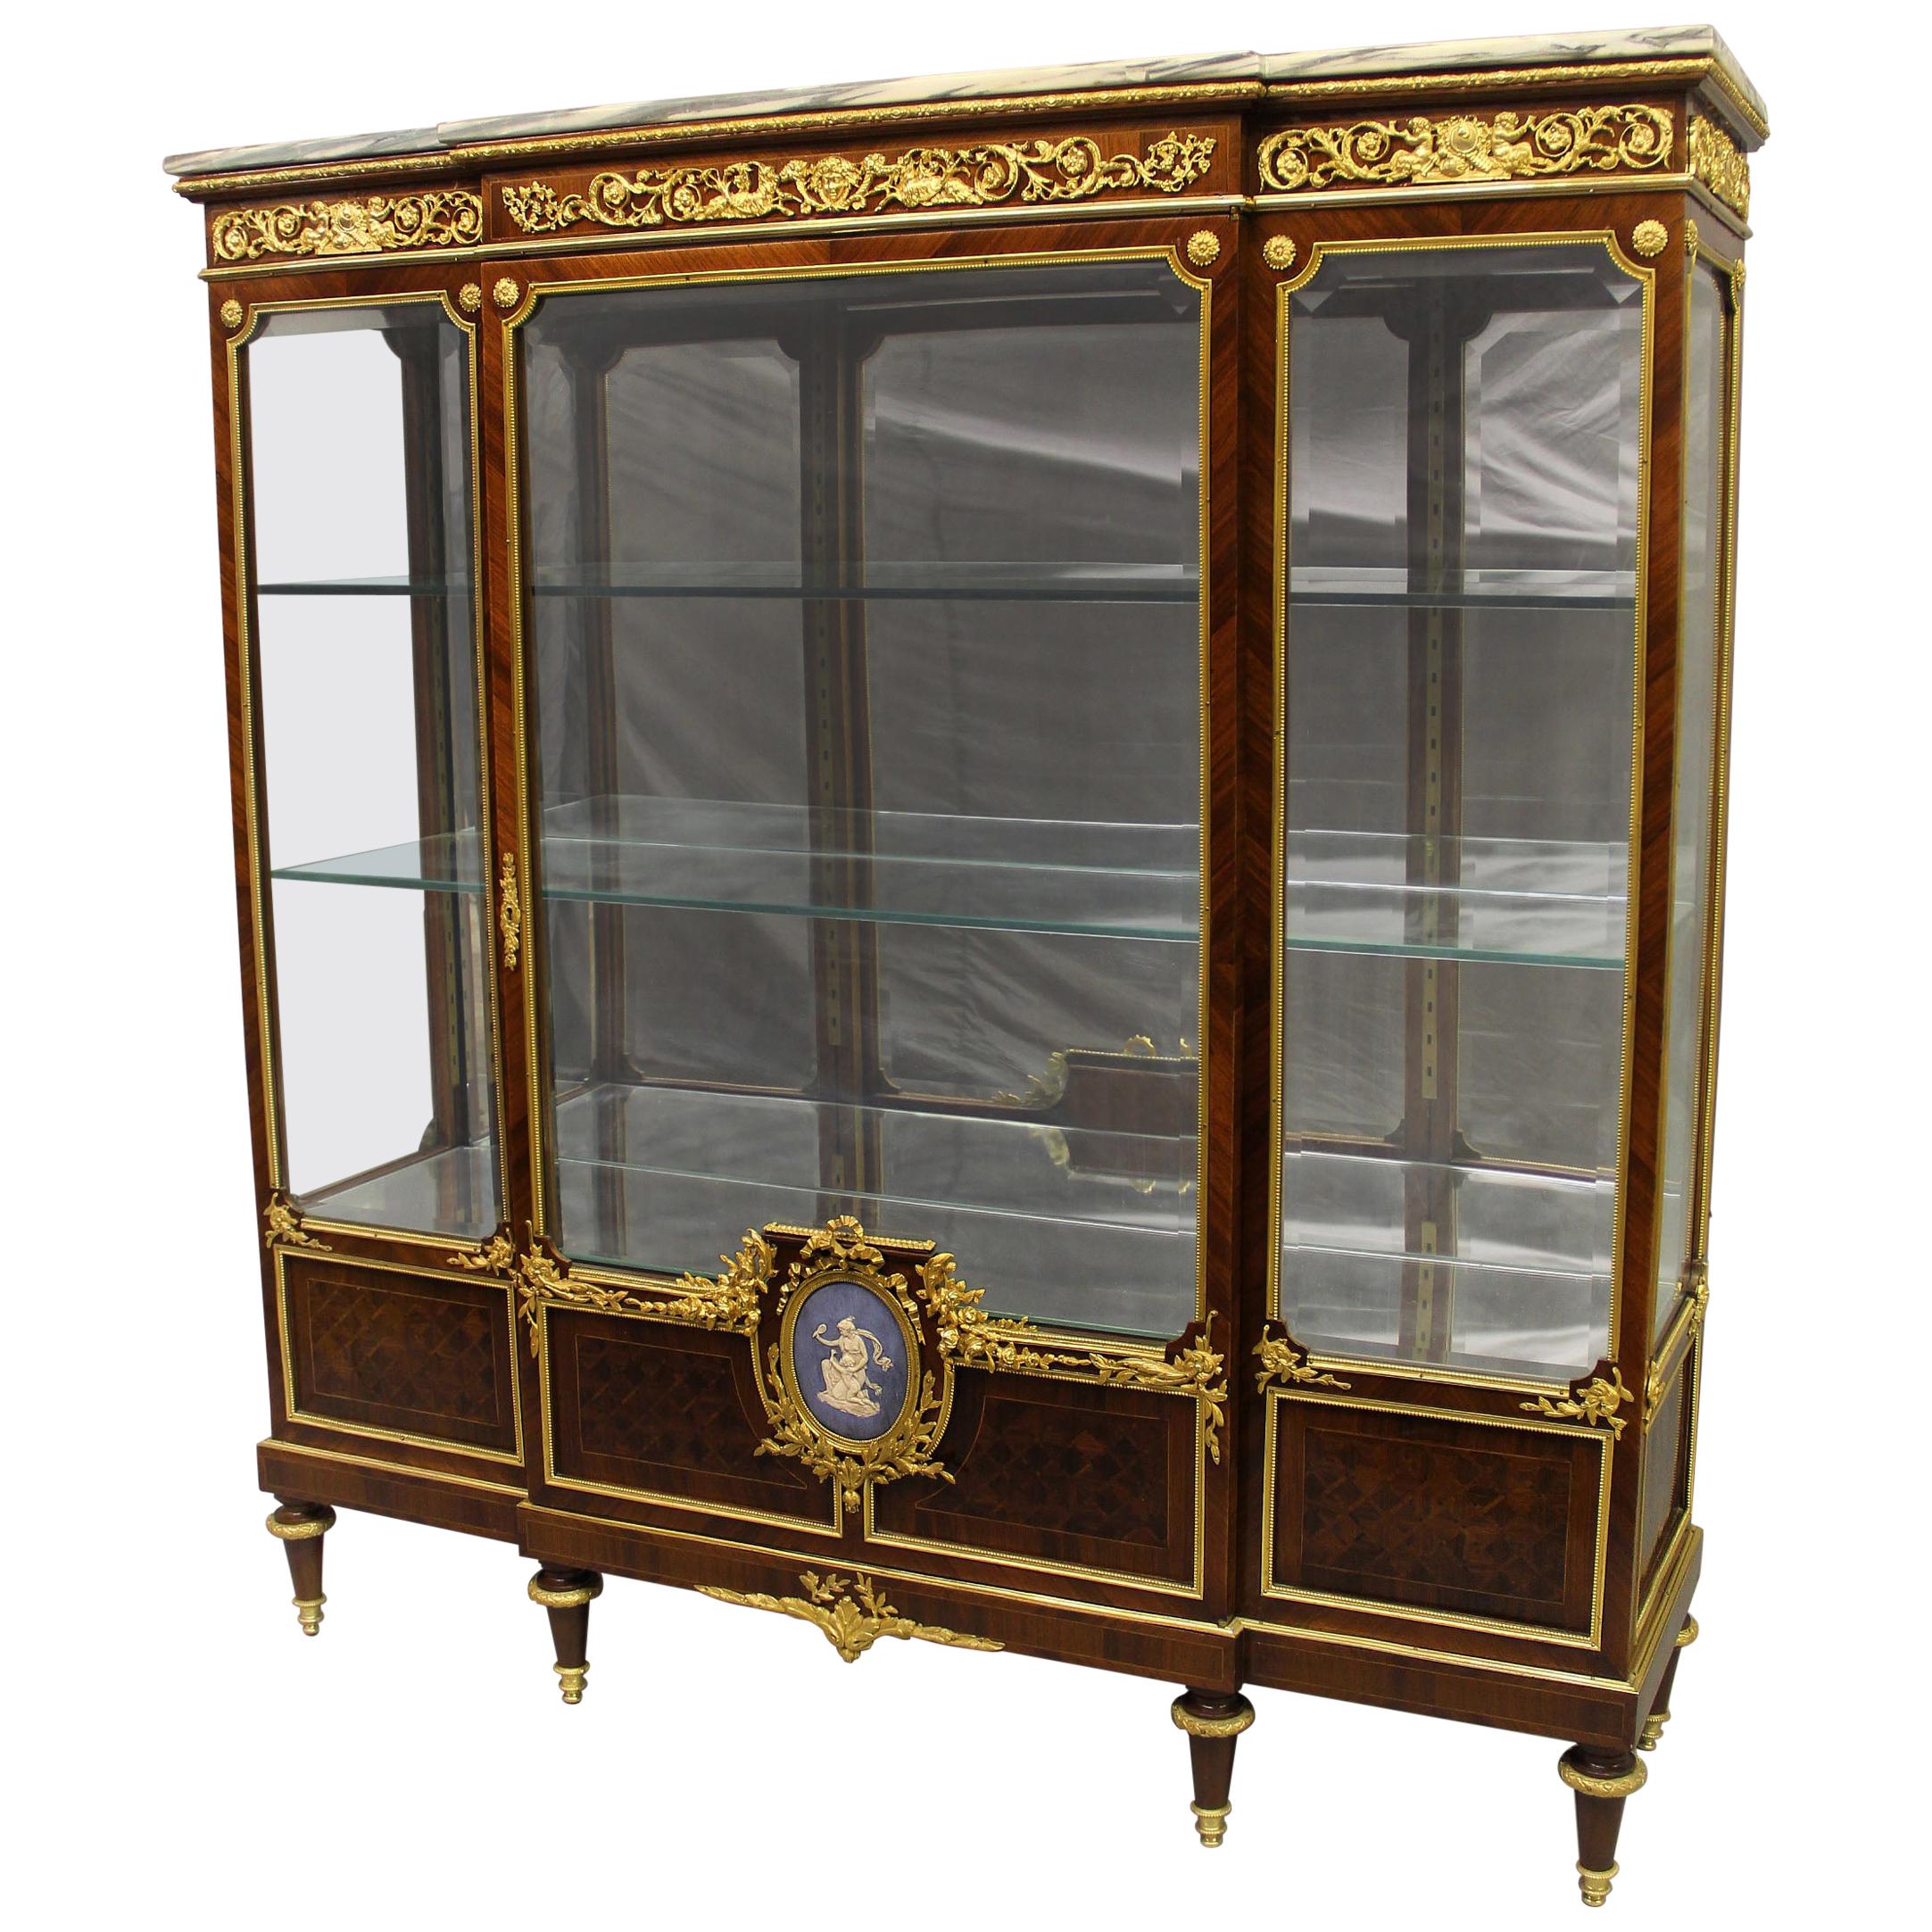 Interesting 19th Century Gilt Bronze and Wedgwood Mounted Parquetry Vitrine For Sale